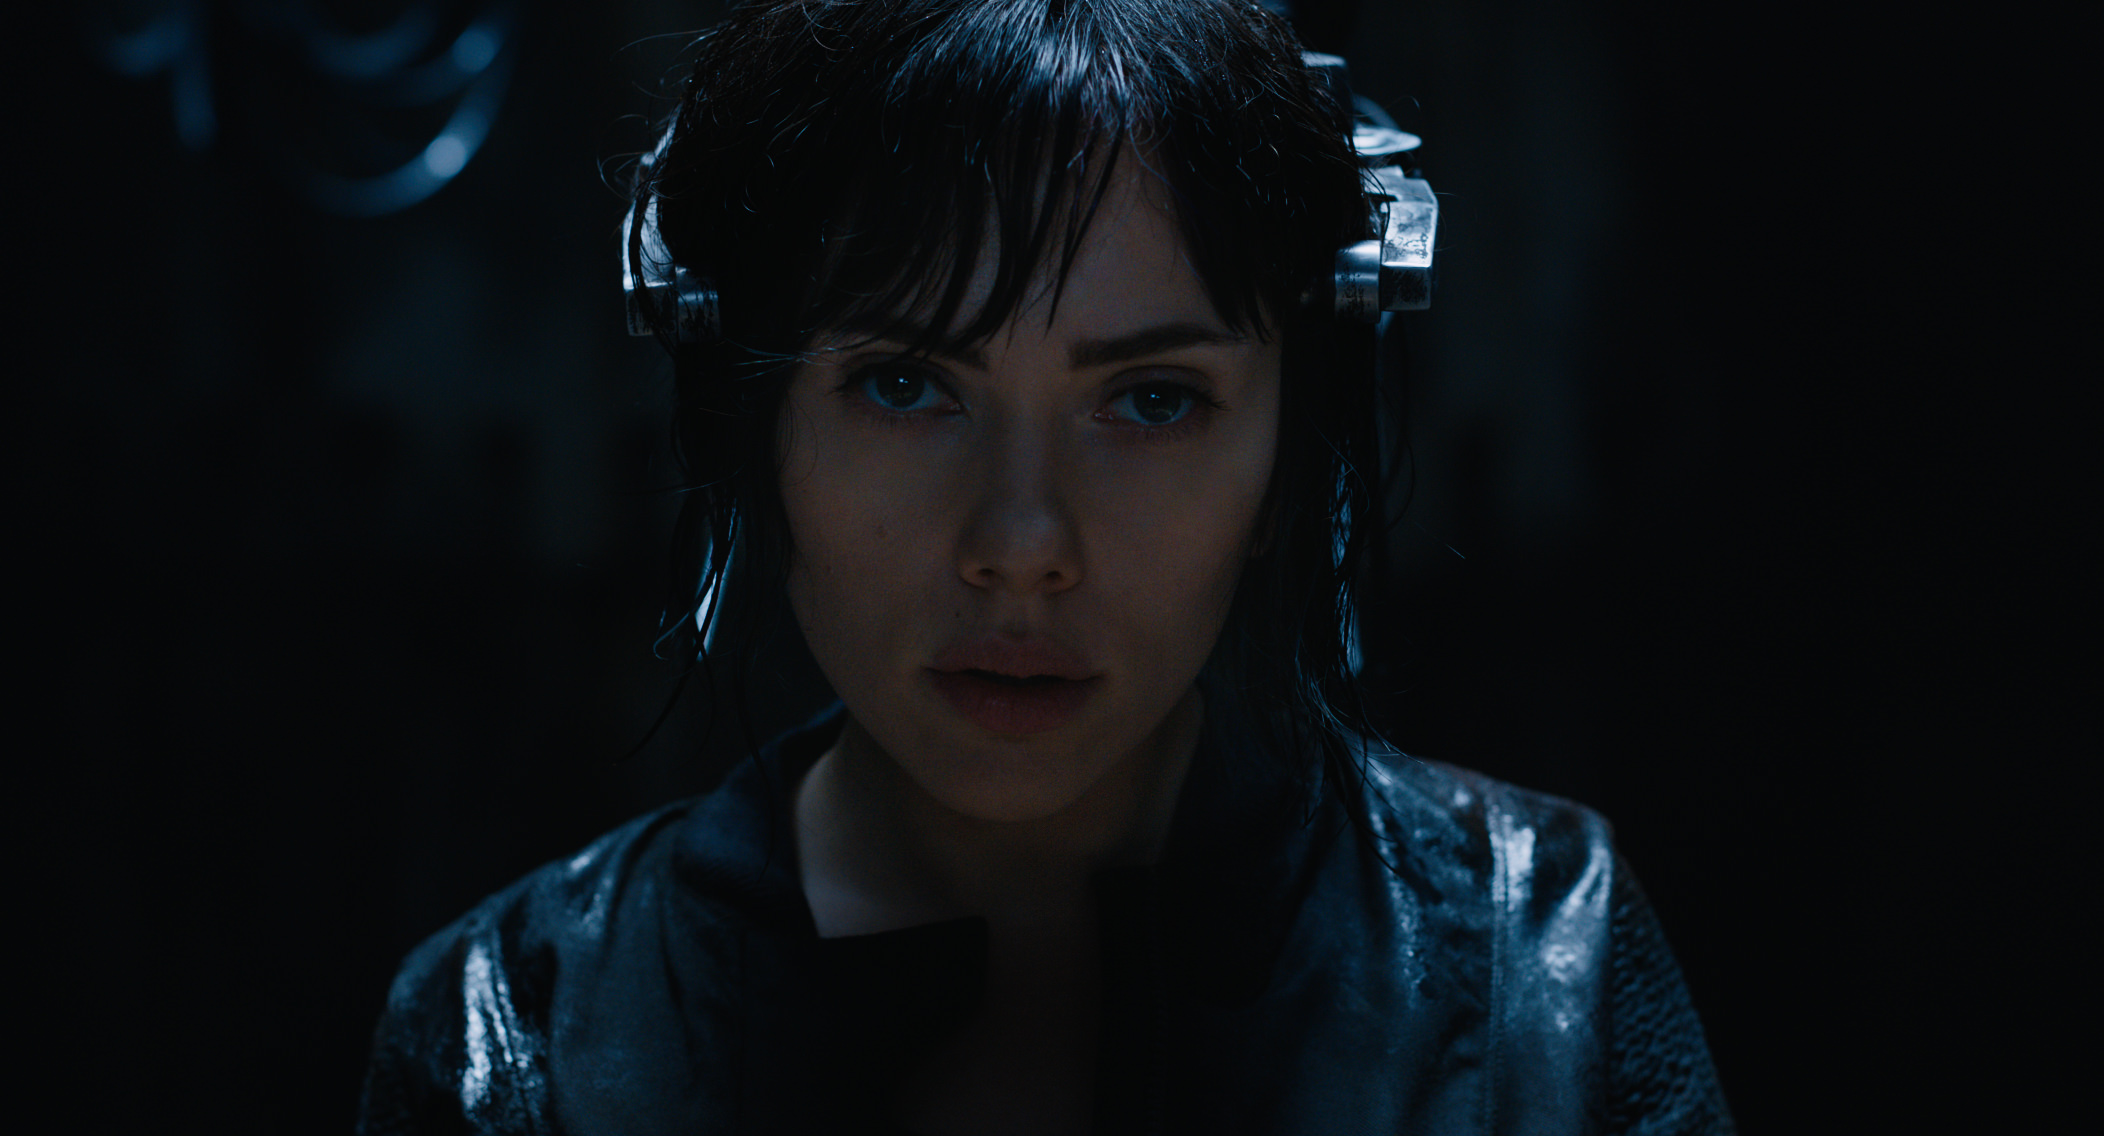 People 2104x1136 movies Ghost in the Shell Ghost in the Shell (Movie) Scarlett Johansson Kusanagi Motoko science fiction science fiction women women